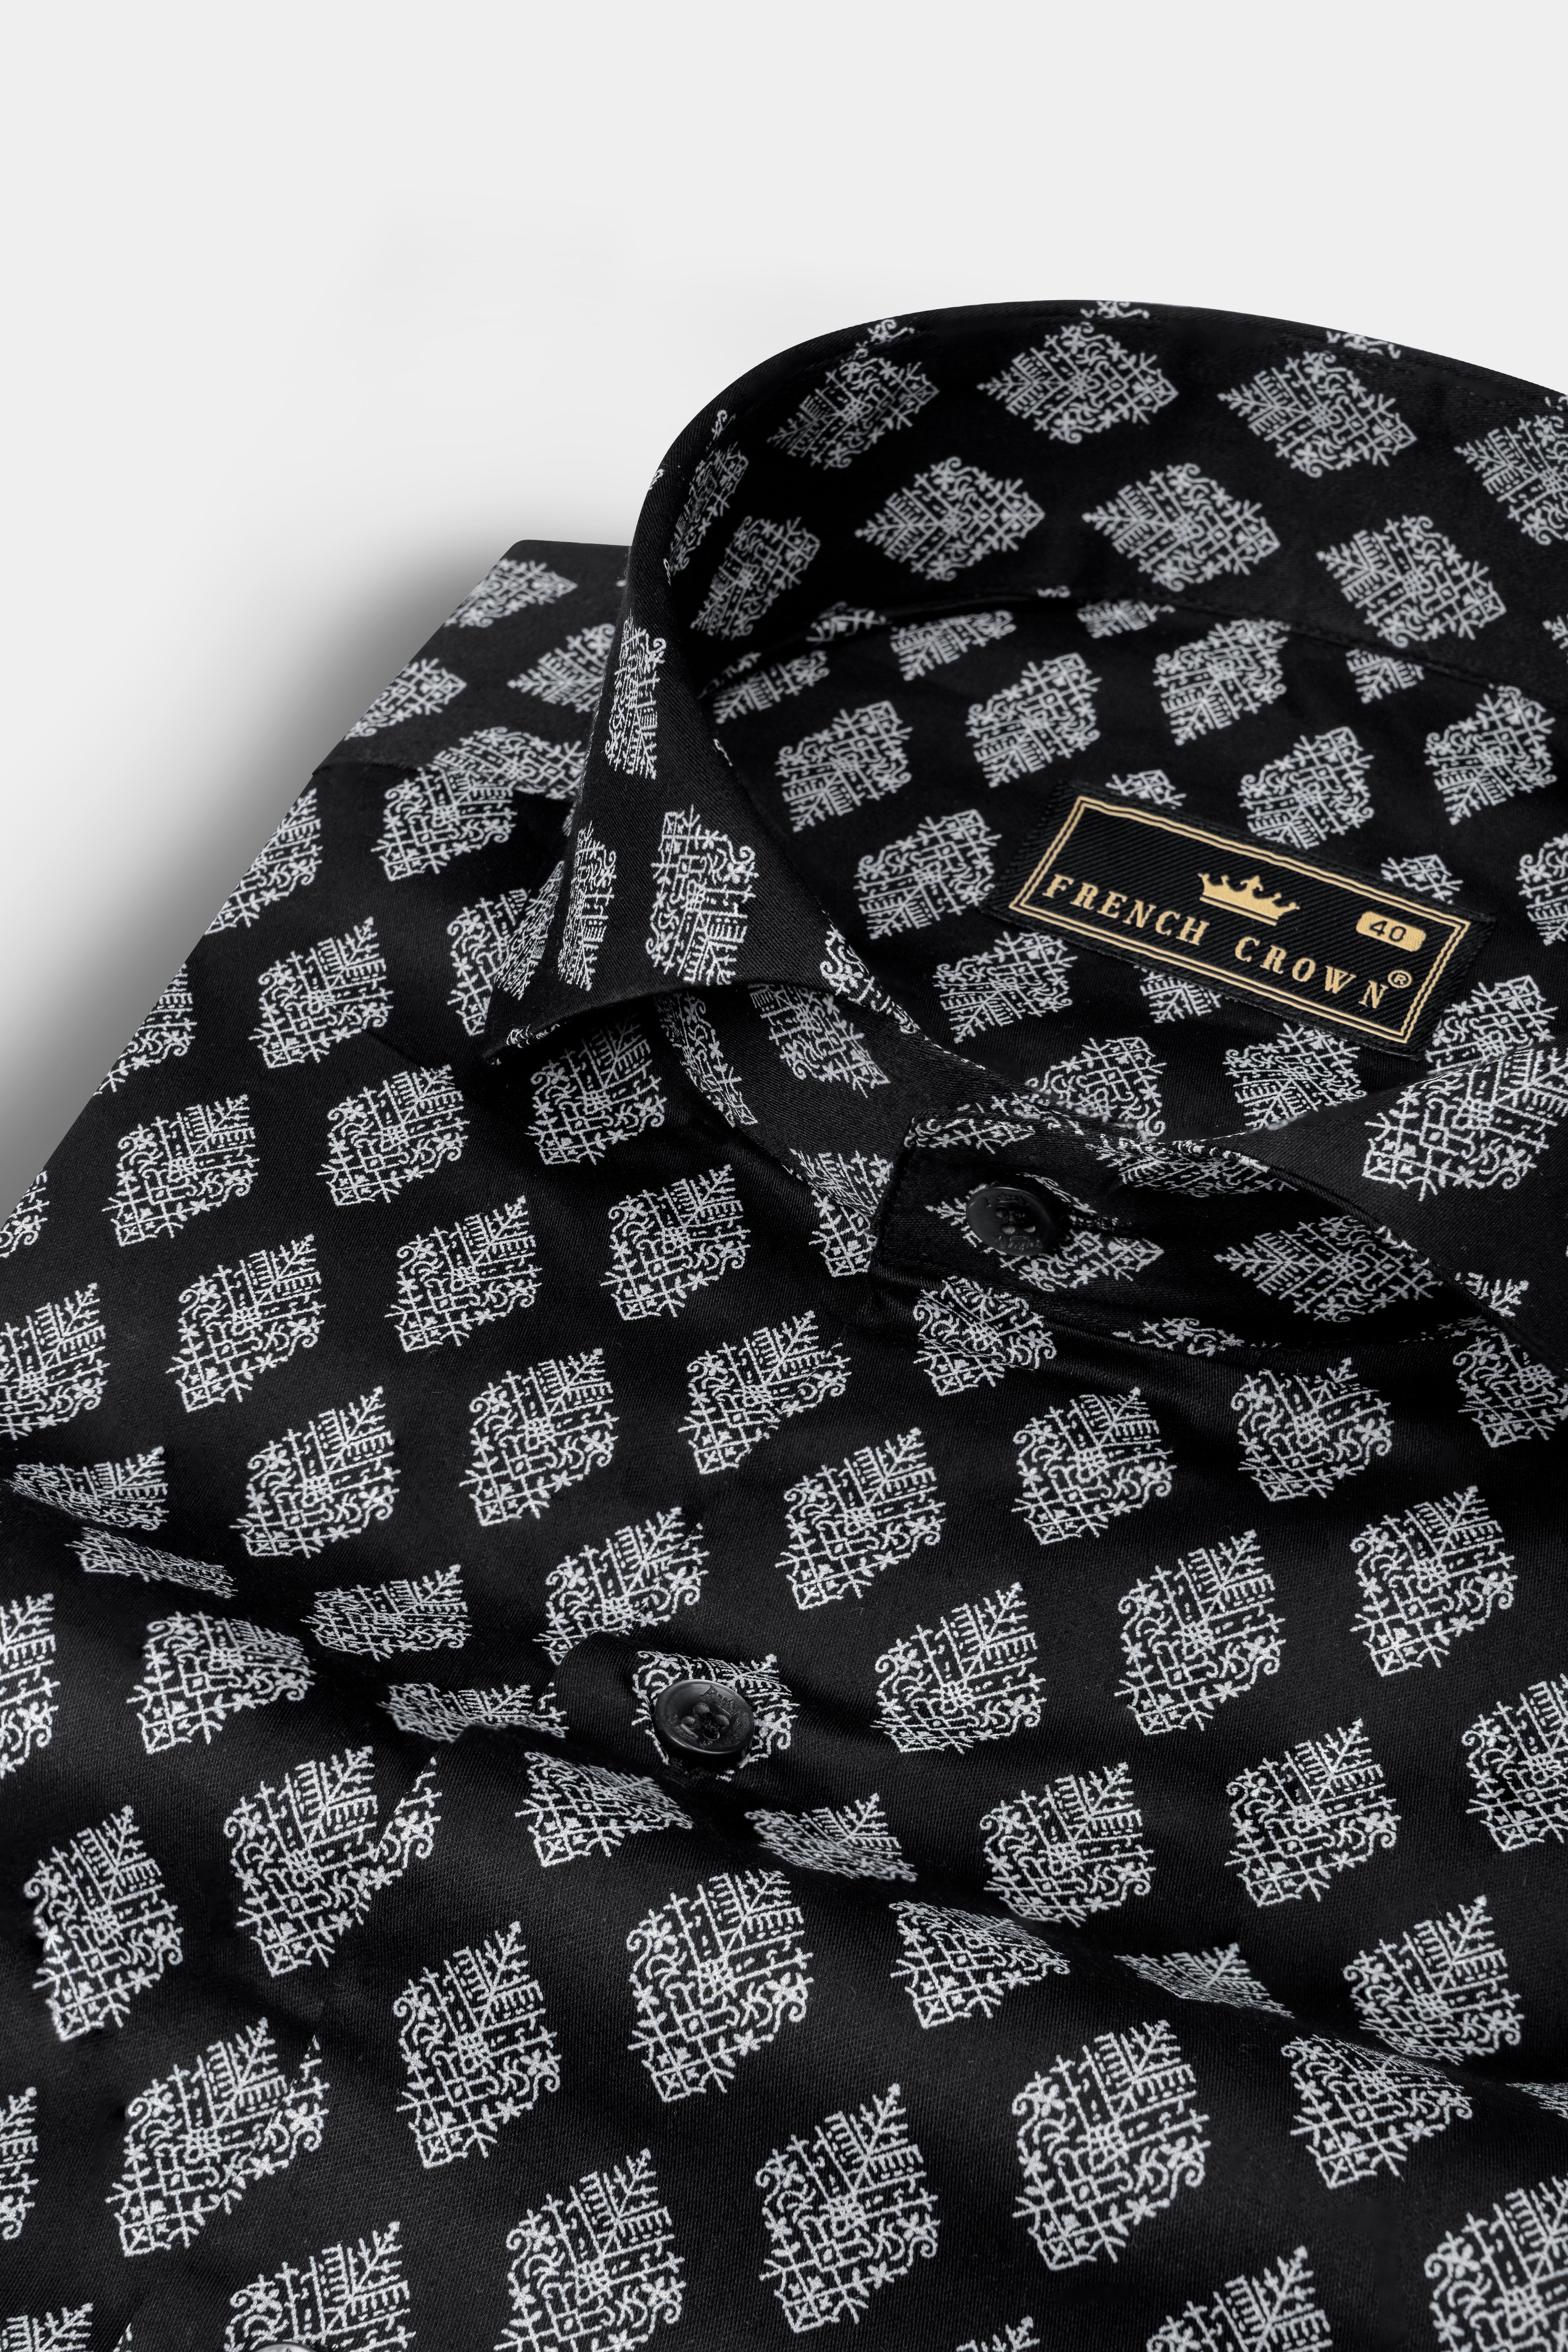 Jade Black with White Twill Printed Cotton Shirt